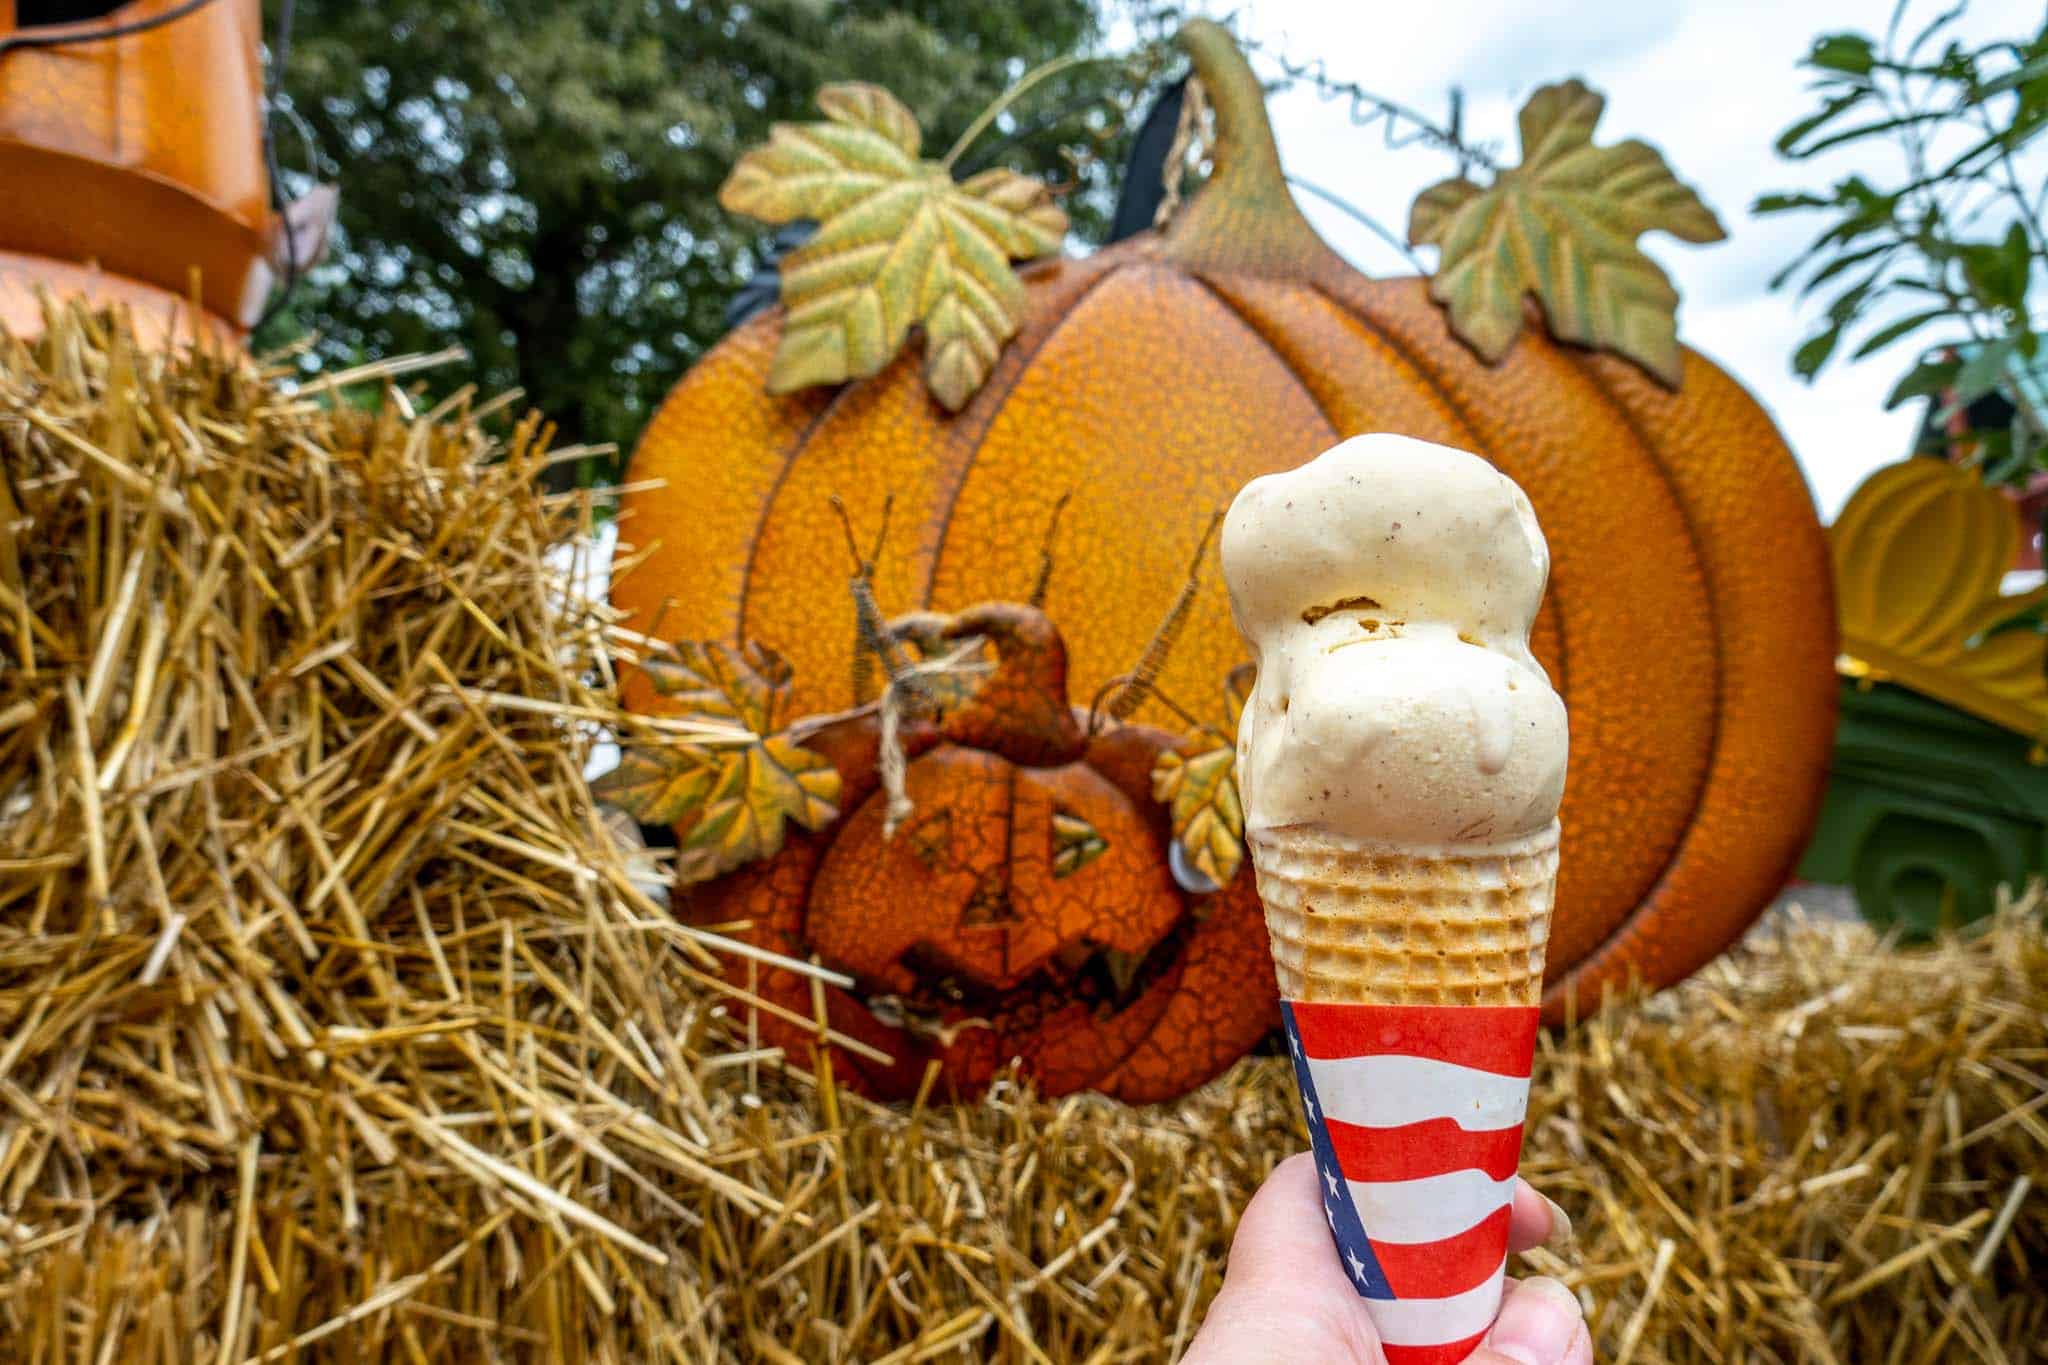 Ice cream cone in front of a pumpkin sign